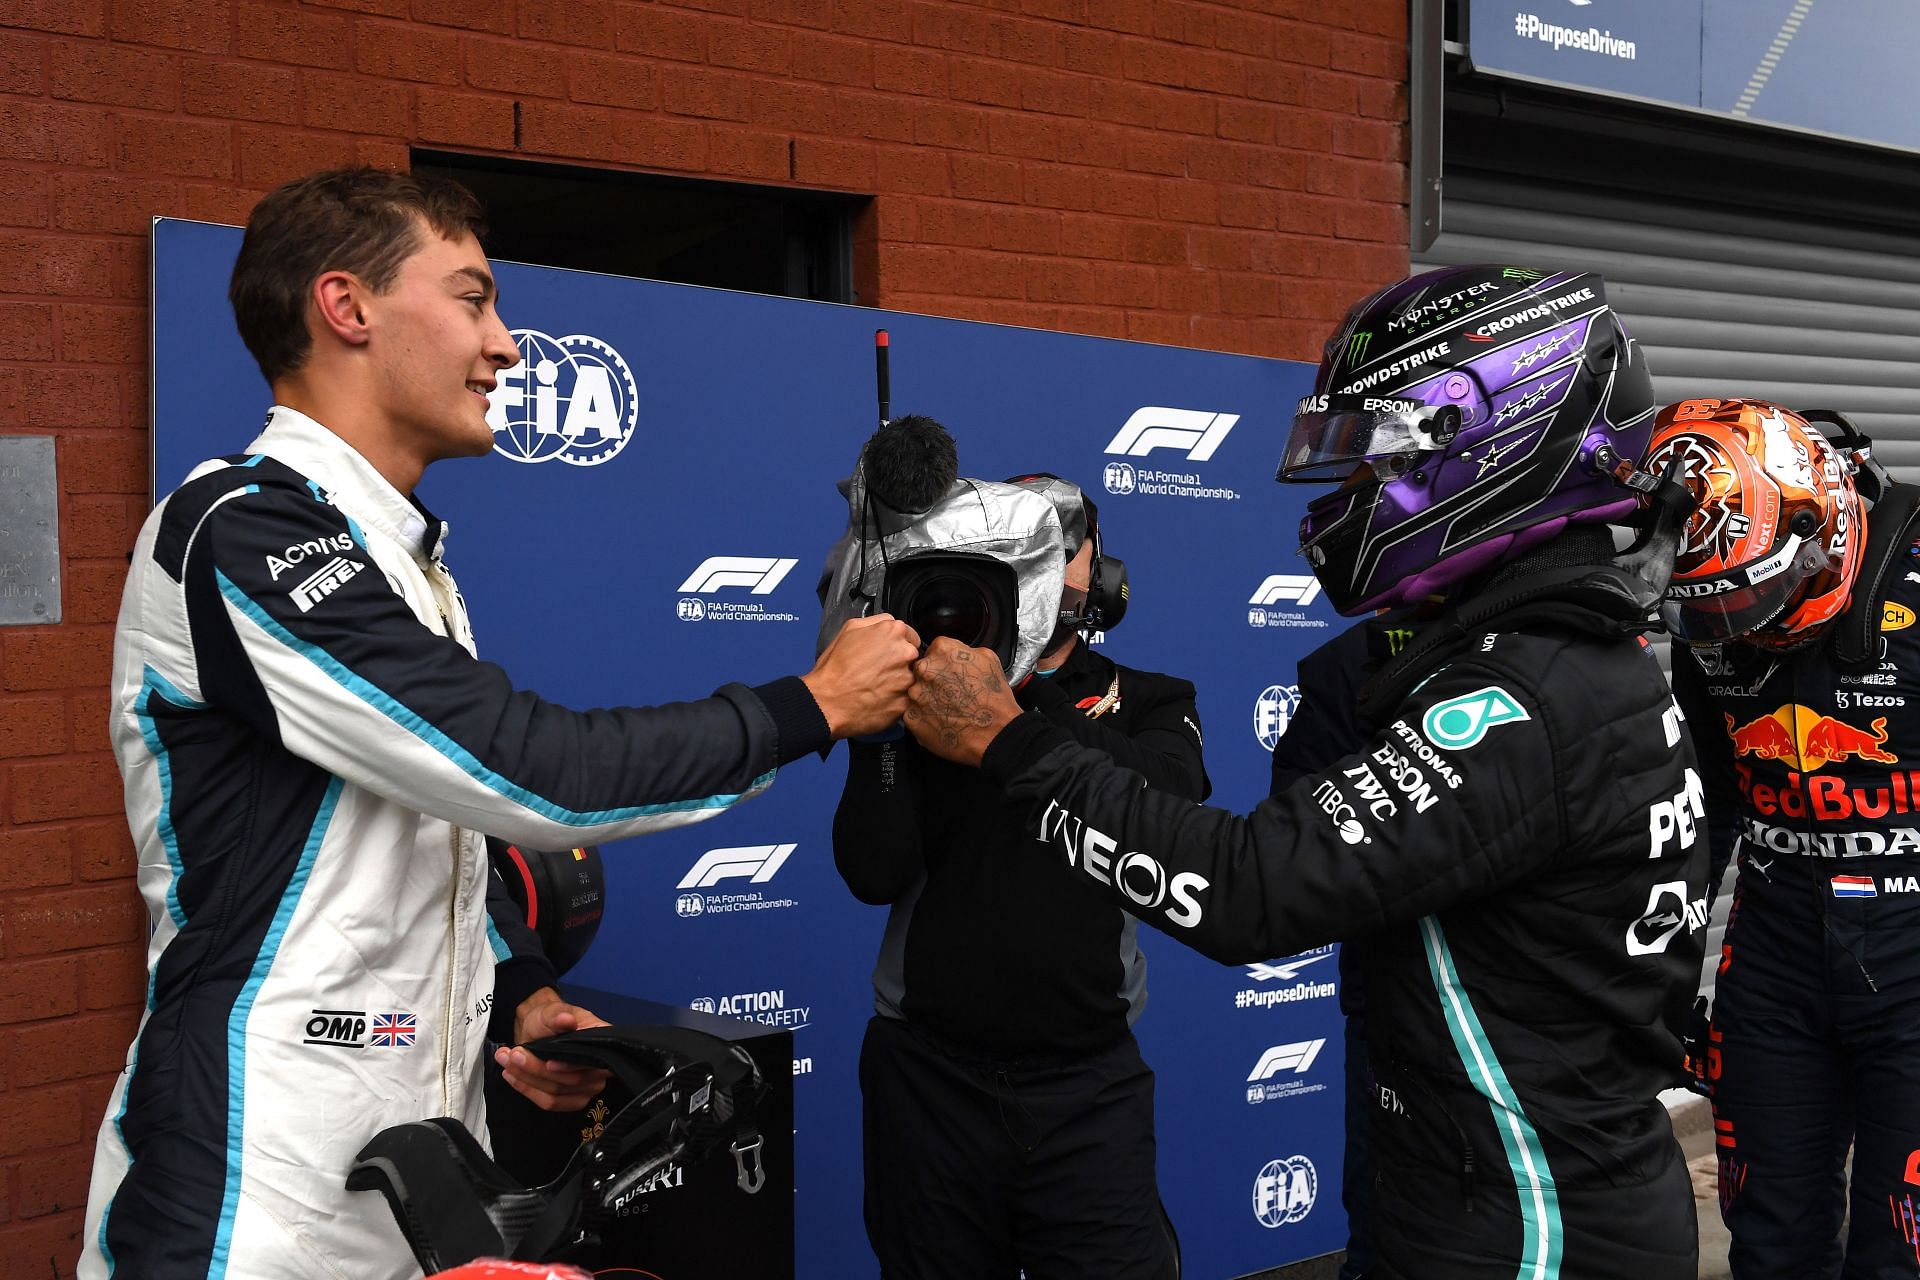 George Russell managed to outqualify his future teammate Lewis Hamilton in his Williams at the 2021 Belgian Grand Prix